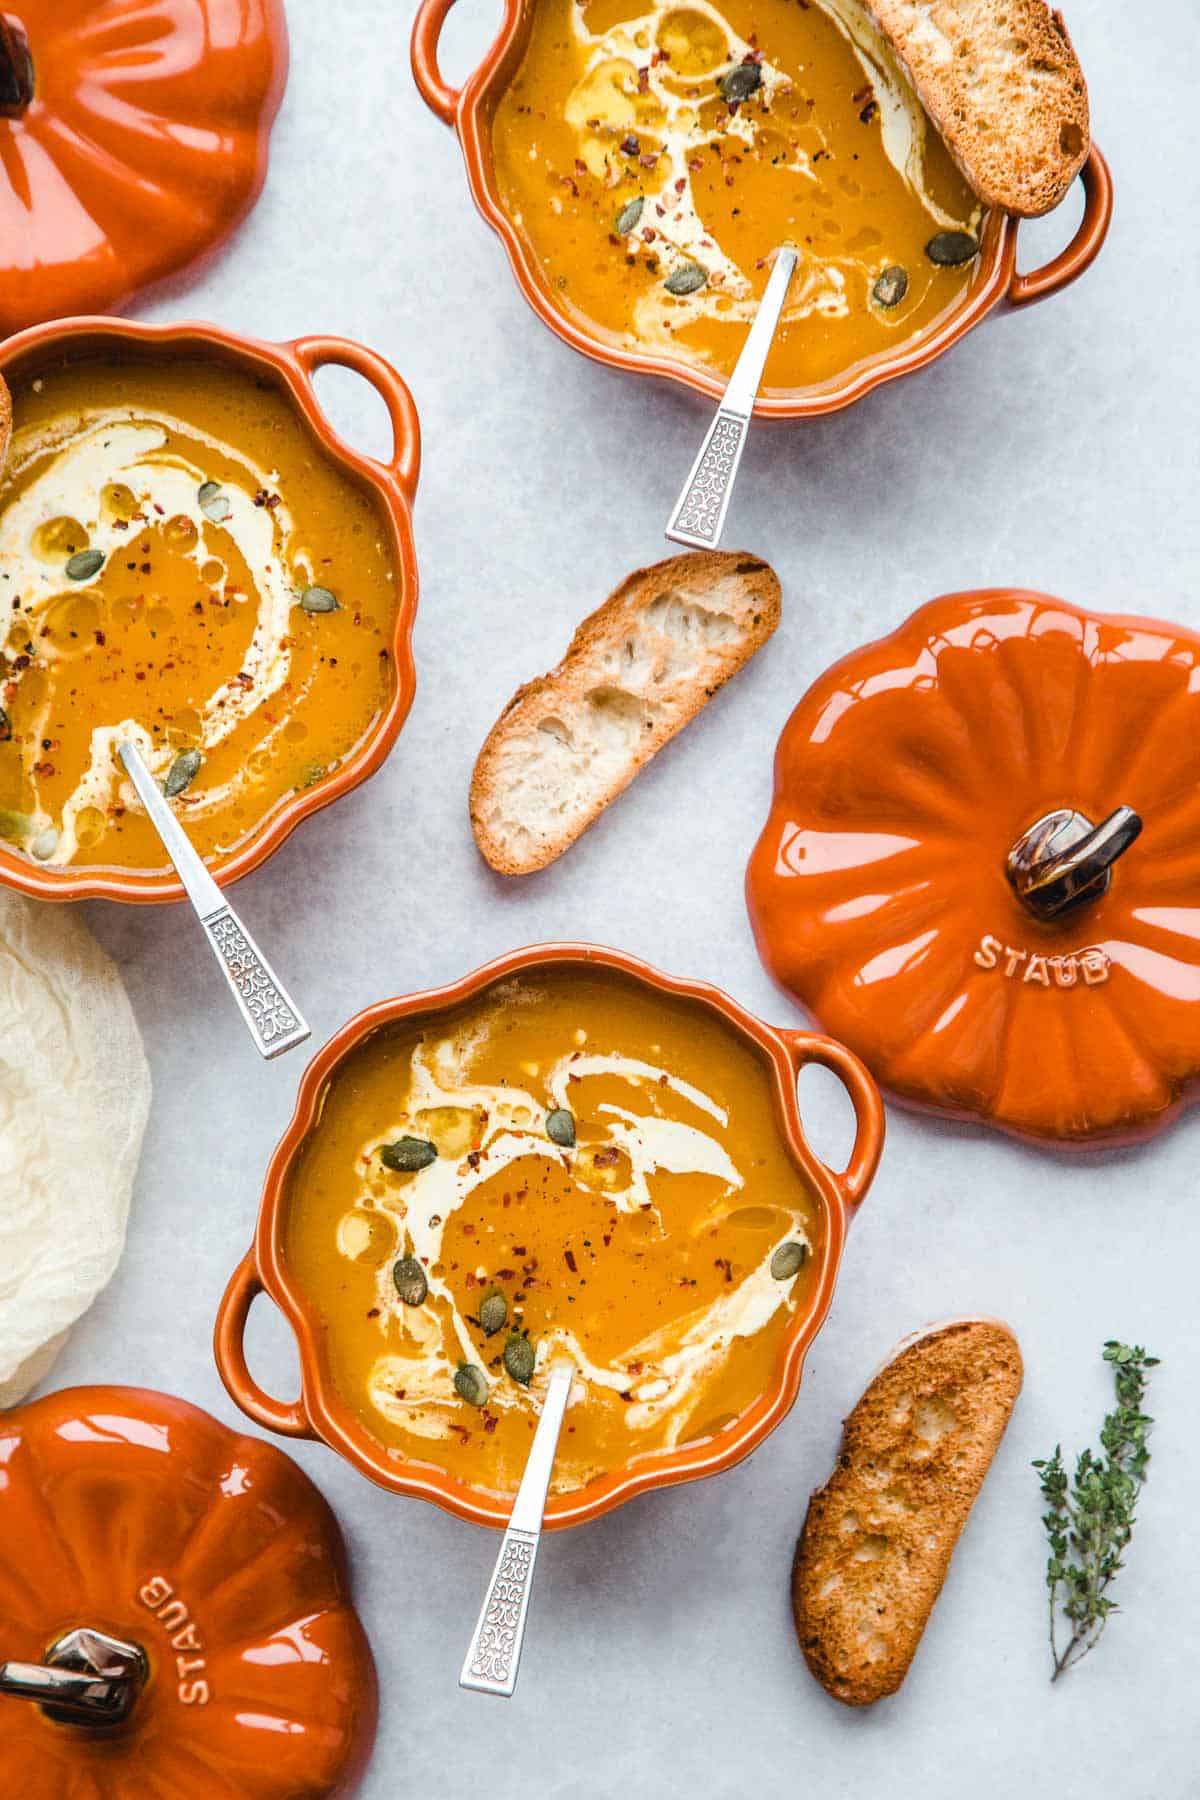 3 Staub pumpkin cocottes with Vegan Pumpkin Soup and toasted bread